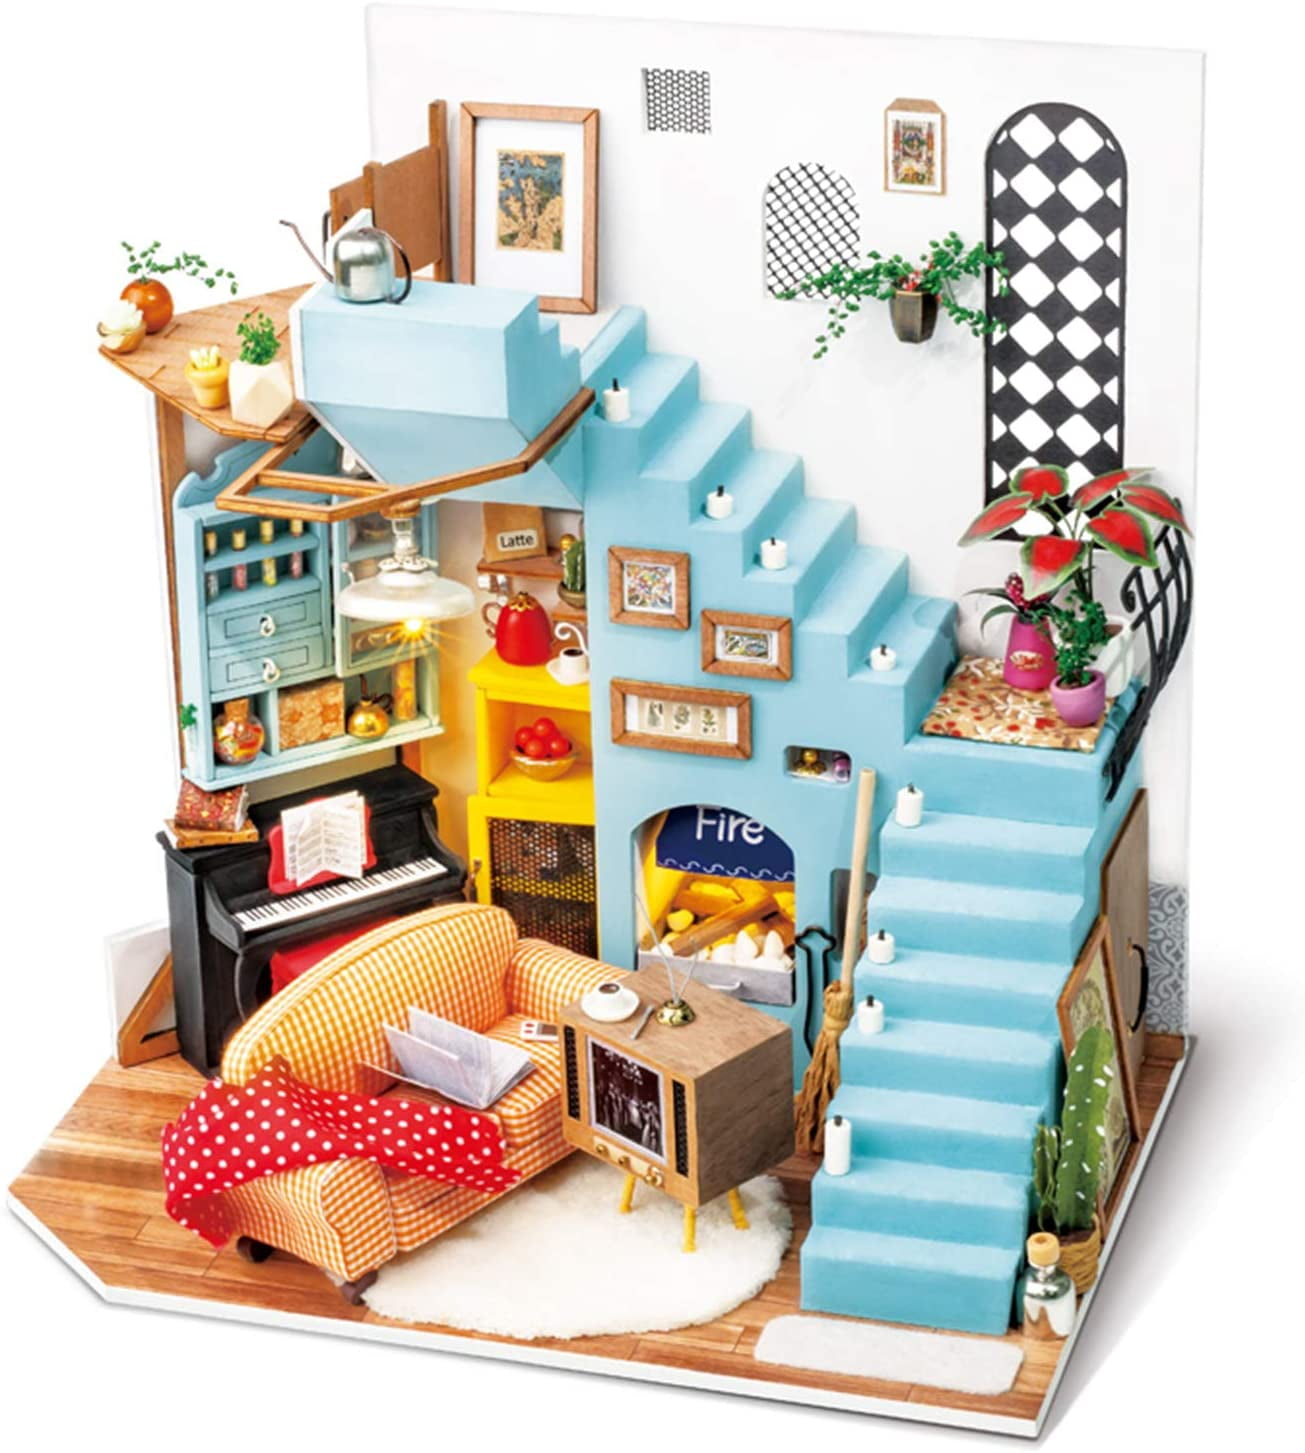 Rolife Dollhouse DIY Craft House Kit-Small Sized Miniature With Accessories And 